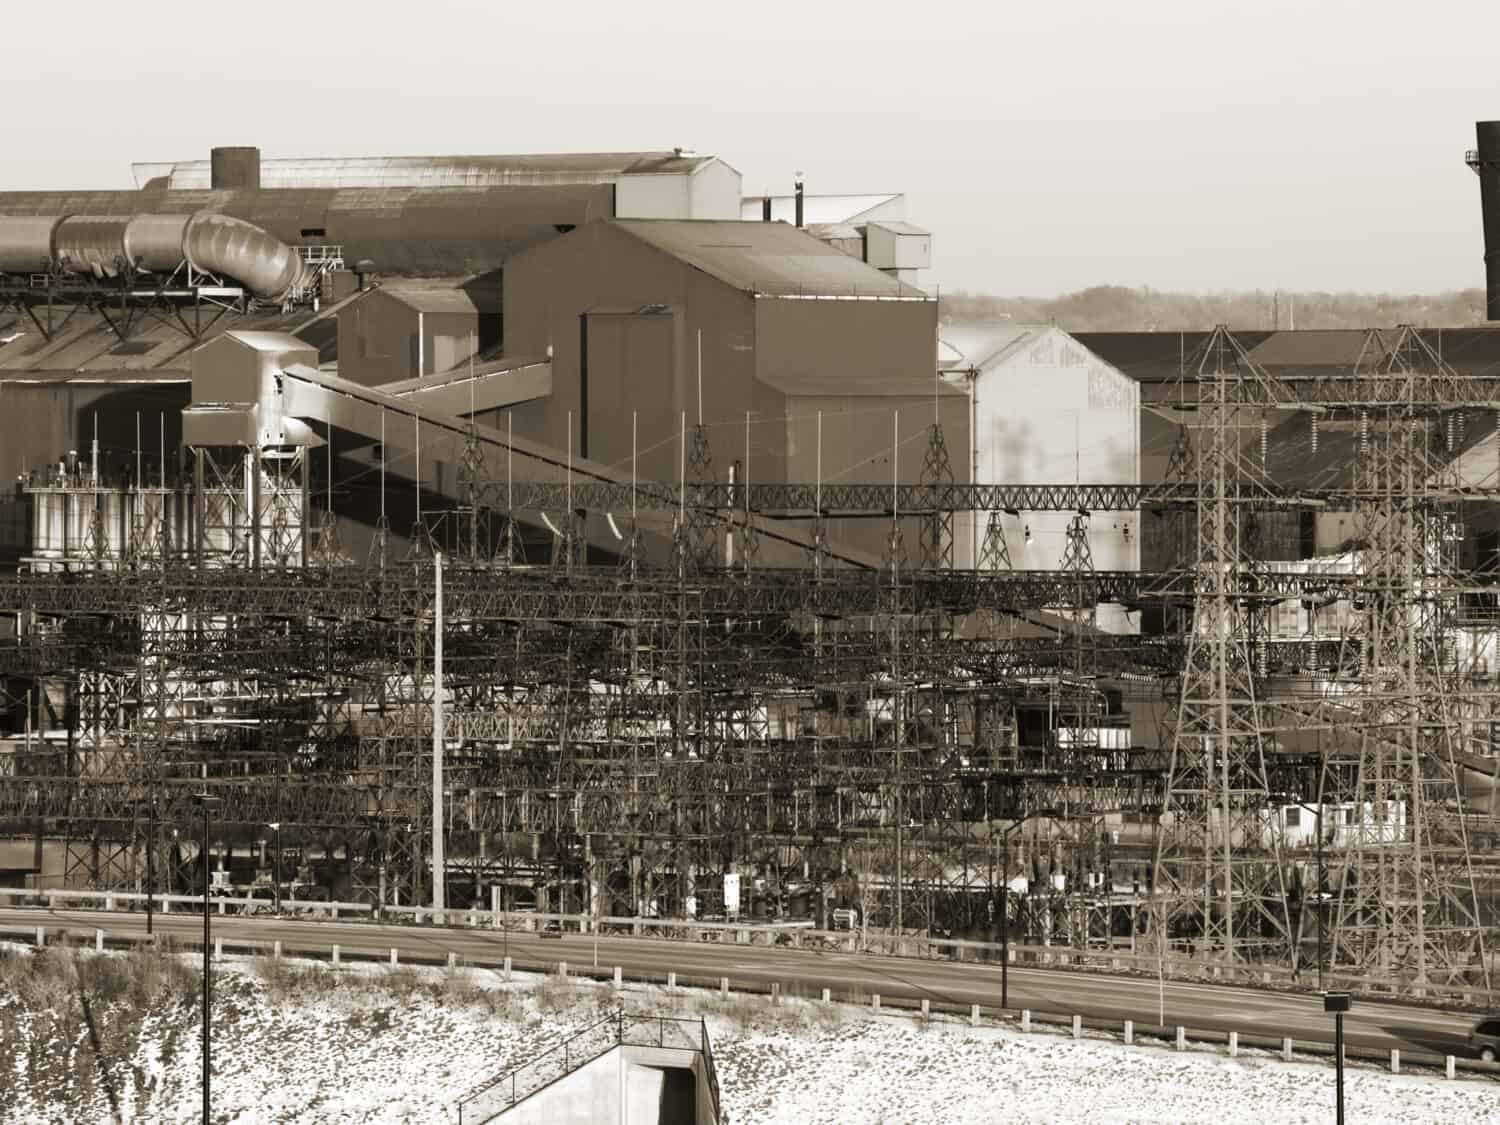 Old steel mill in winter, black and white, sepia toned